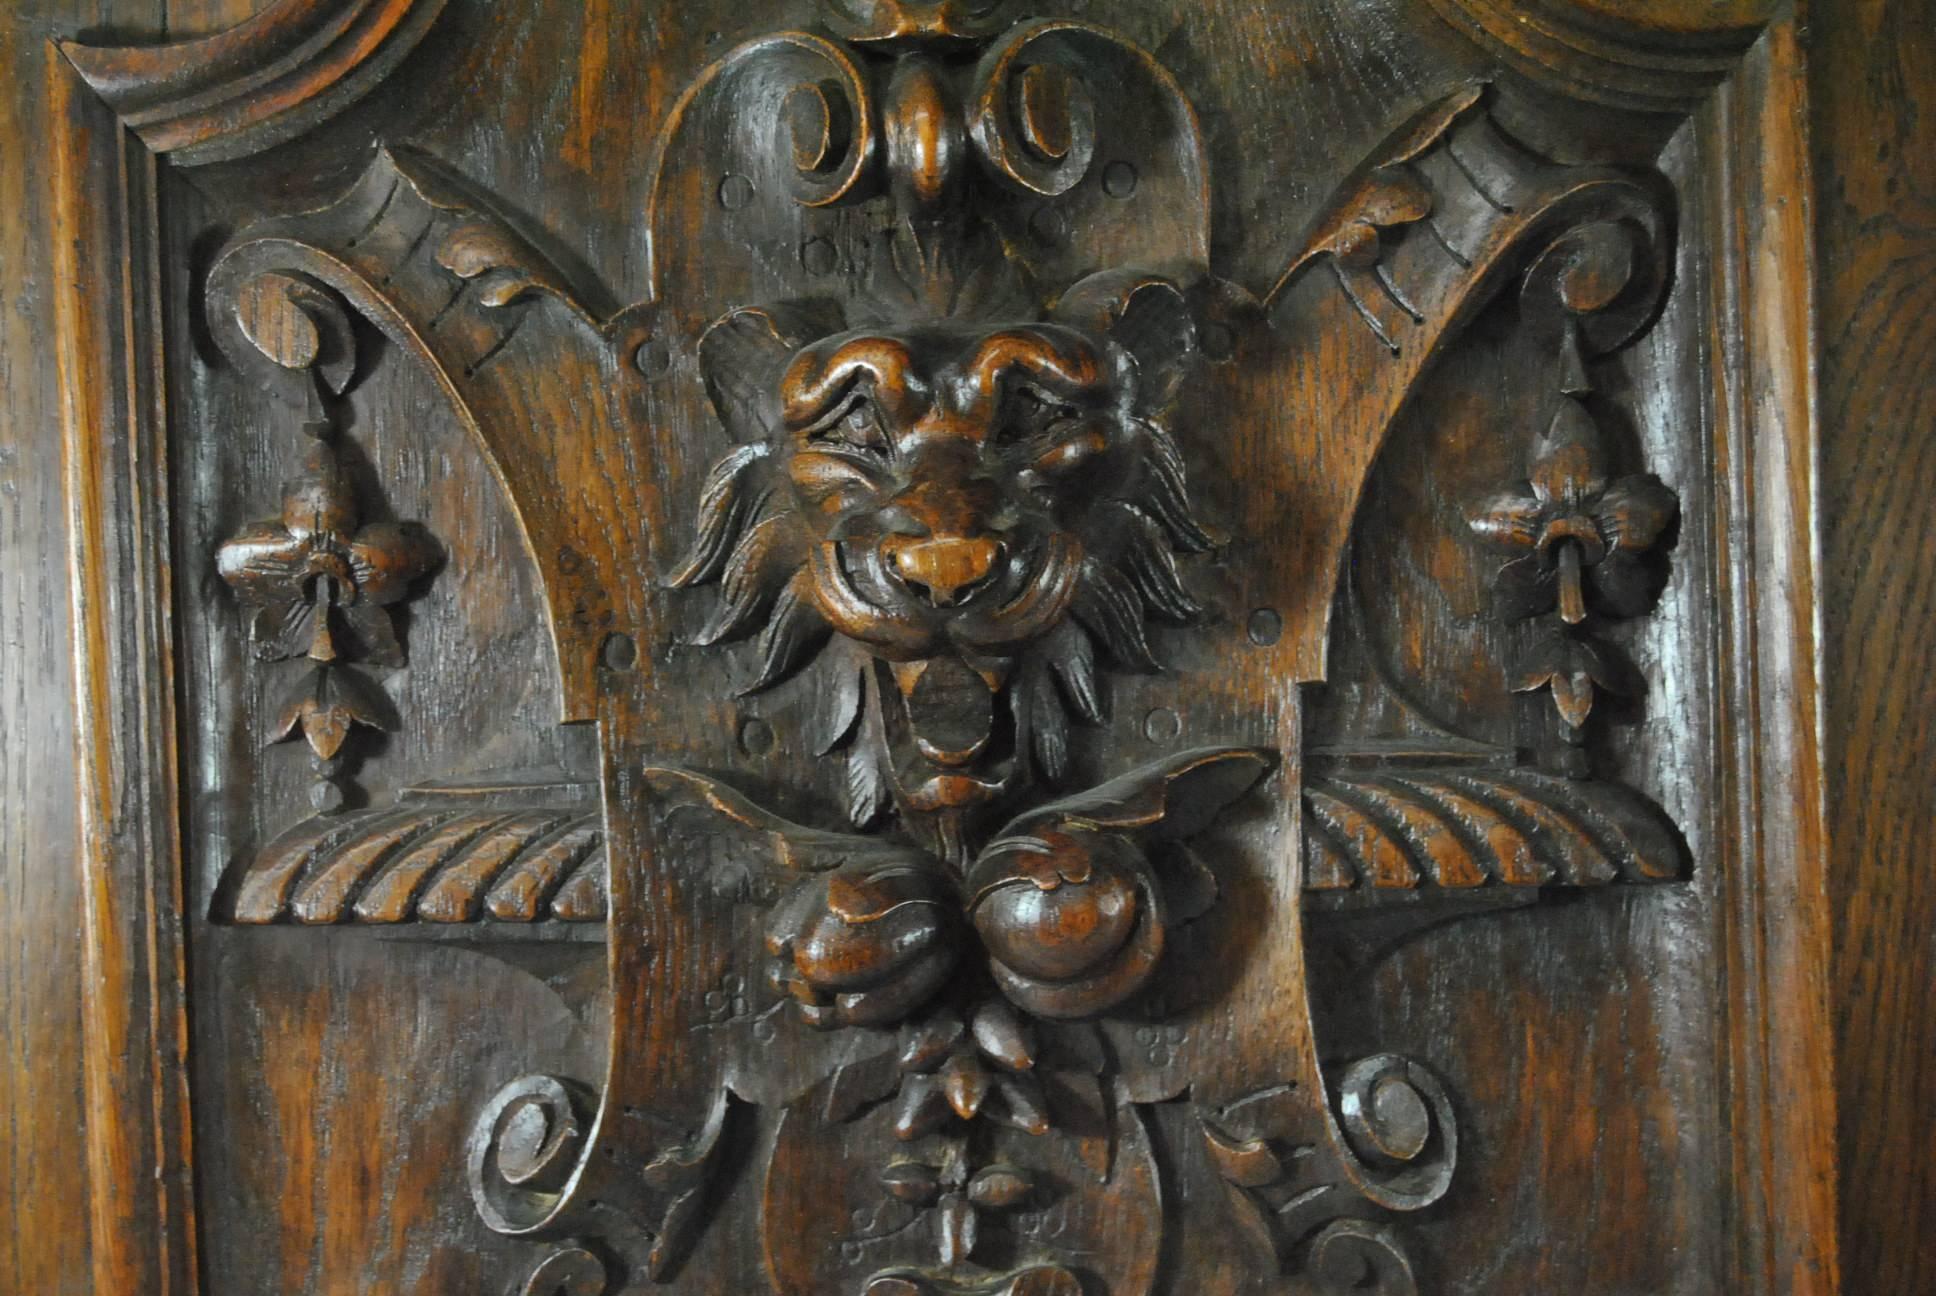 A stunning pair of Tudor style carved panels. These beautiful panels are finely hand-carved in solid oak. They feature a central lion head above a fruit cluster. High relief carvings that are 2 3/4